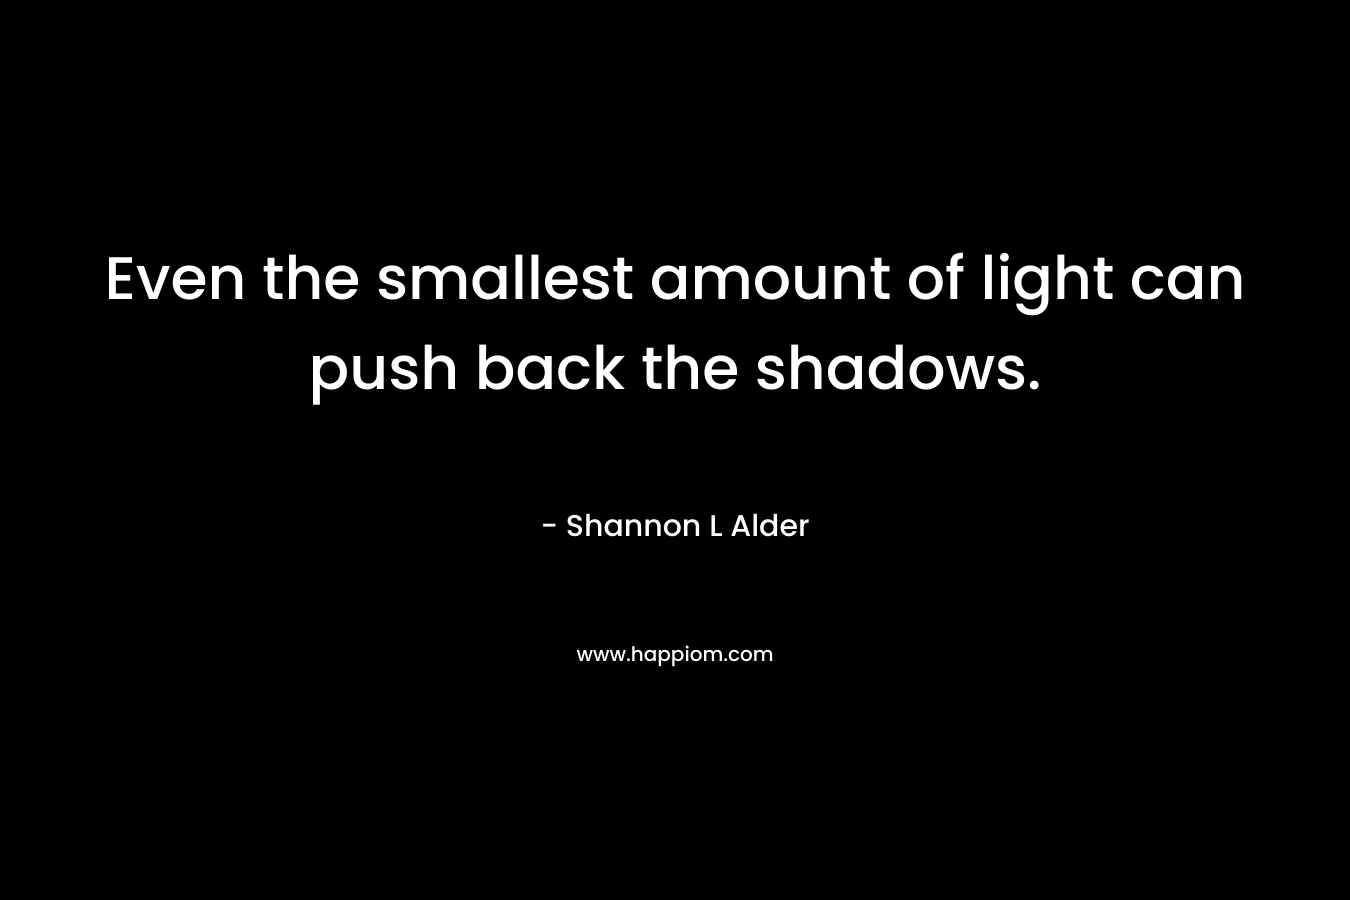 Even the smallest amount of light can push back the shadows.